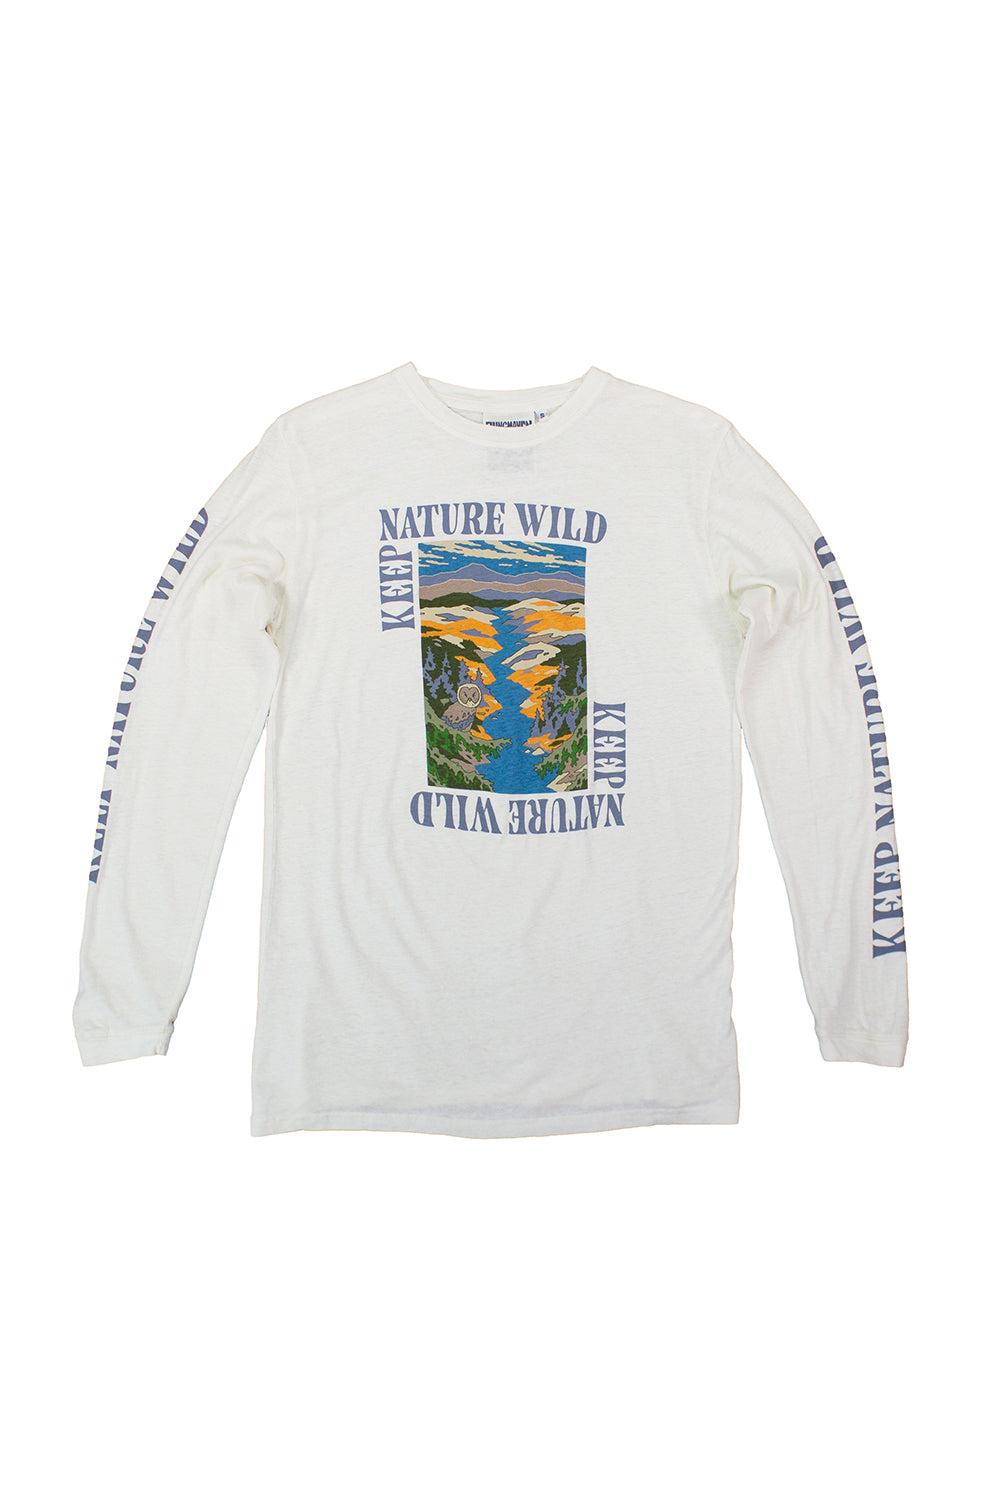 Keep Nature Wild Jung Long Sleeve Tee | Jungmaven Hemp Clothing & Accessories / Color: Washed White